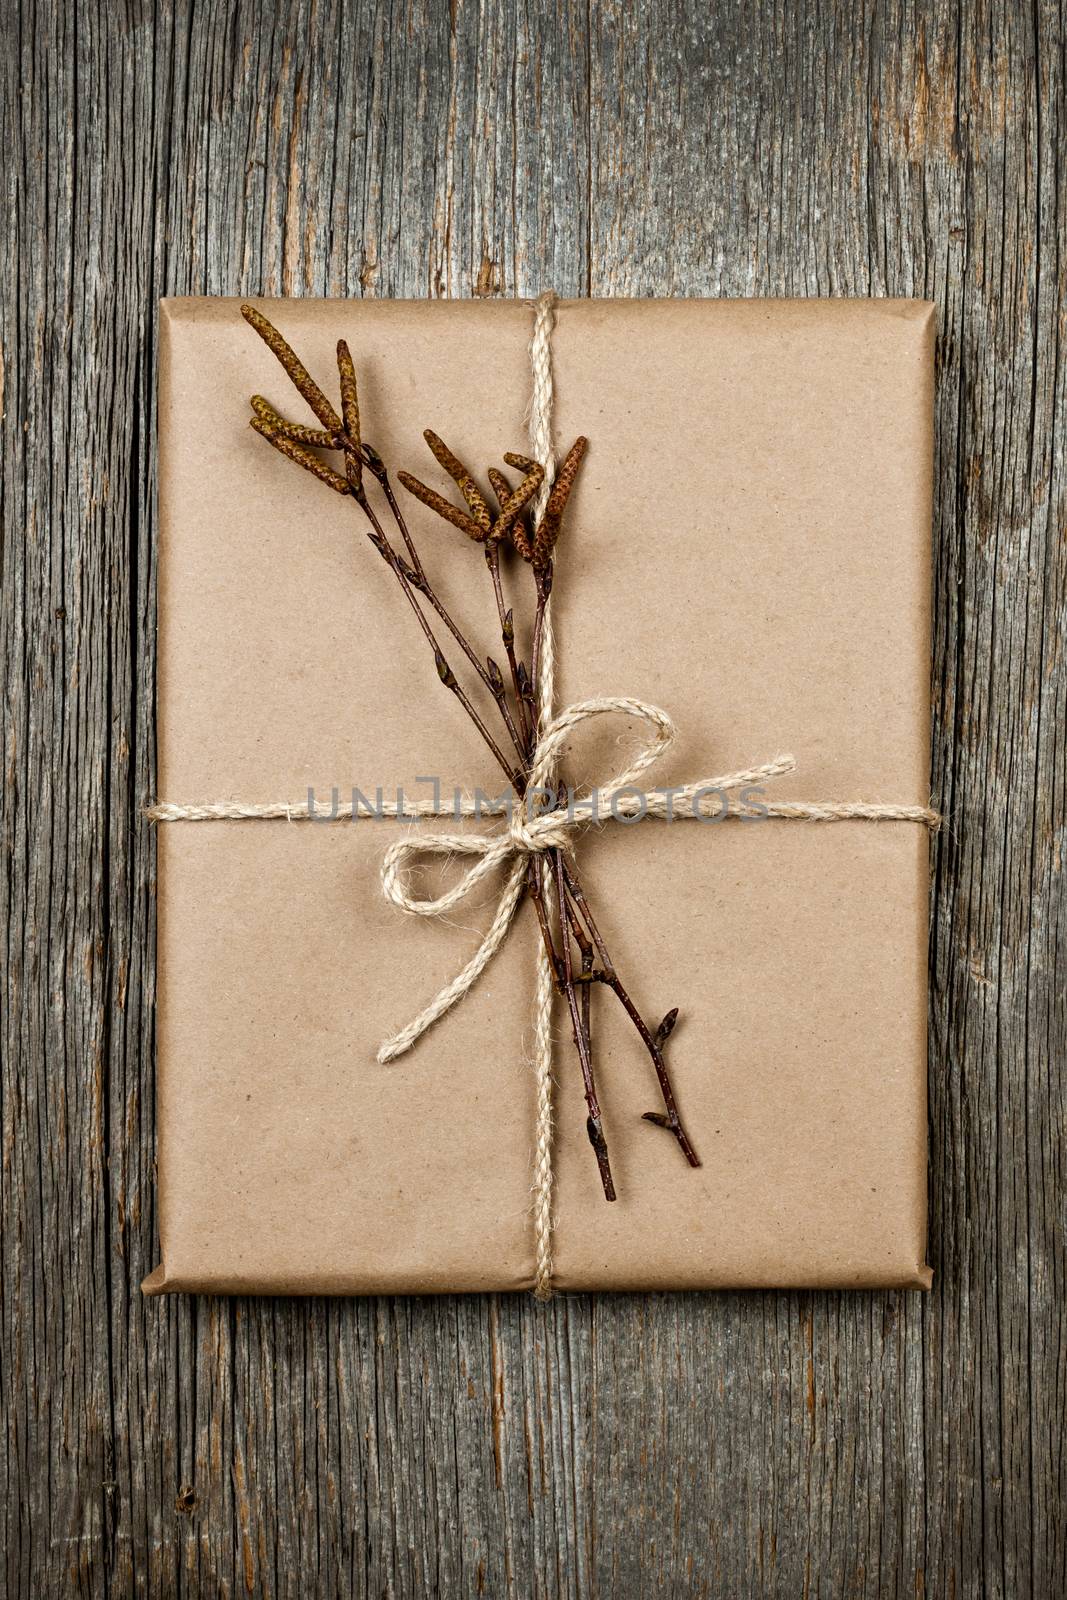 Plain gift with natural decorations by elenathewise